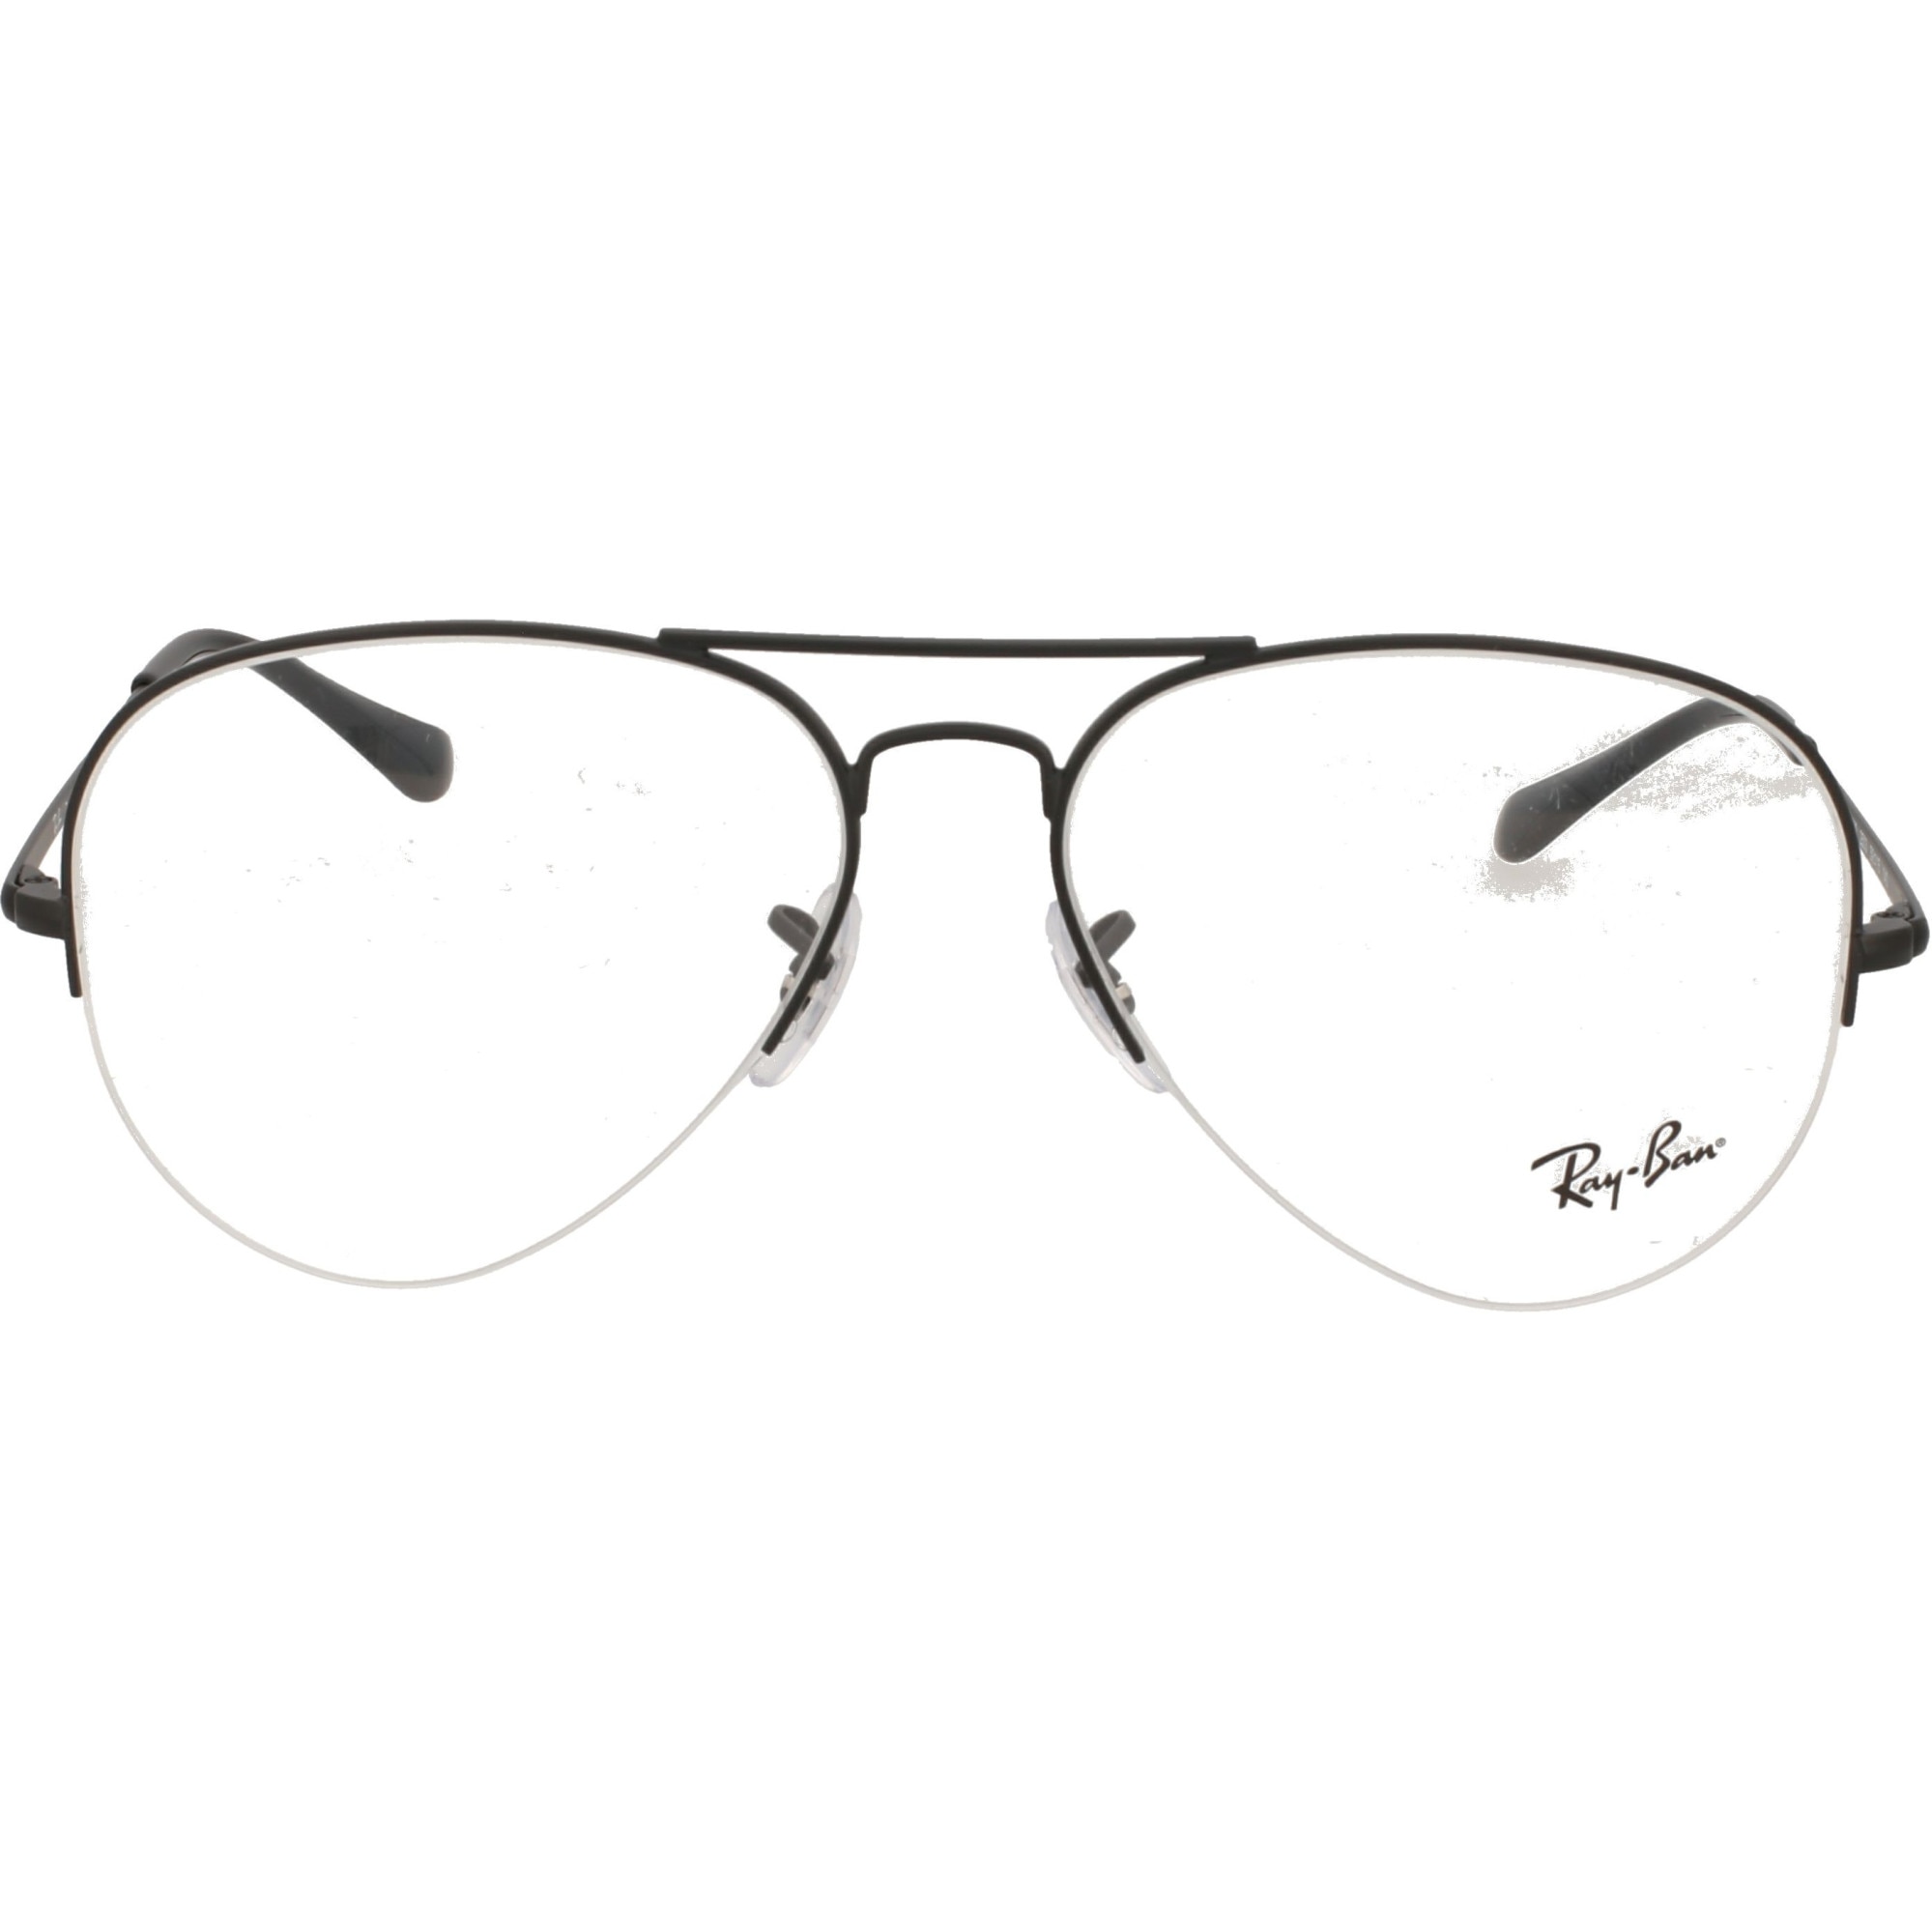 Get used to Is Acquisition Rame ochelari de vedere Ray-Ban RX6589 2503, Negru, 59 mm - eMAG.ro